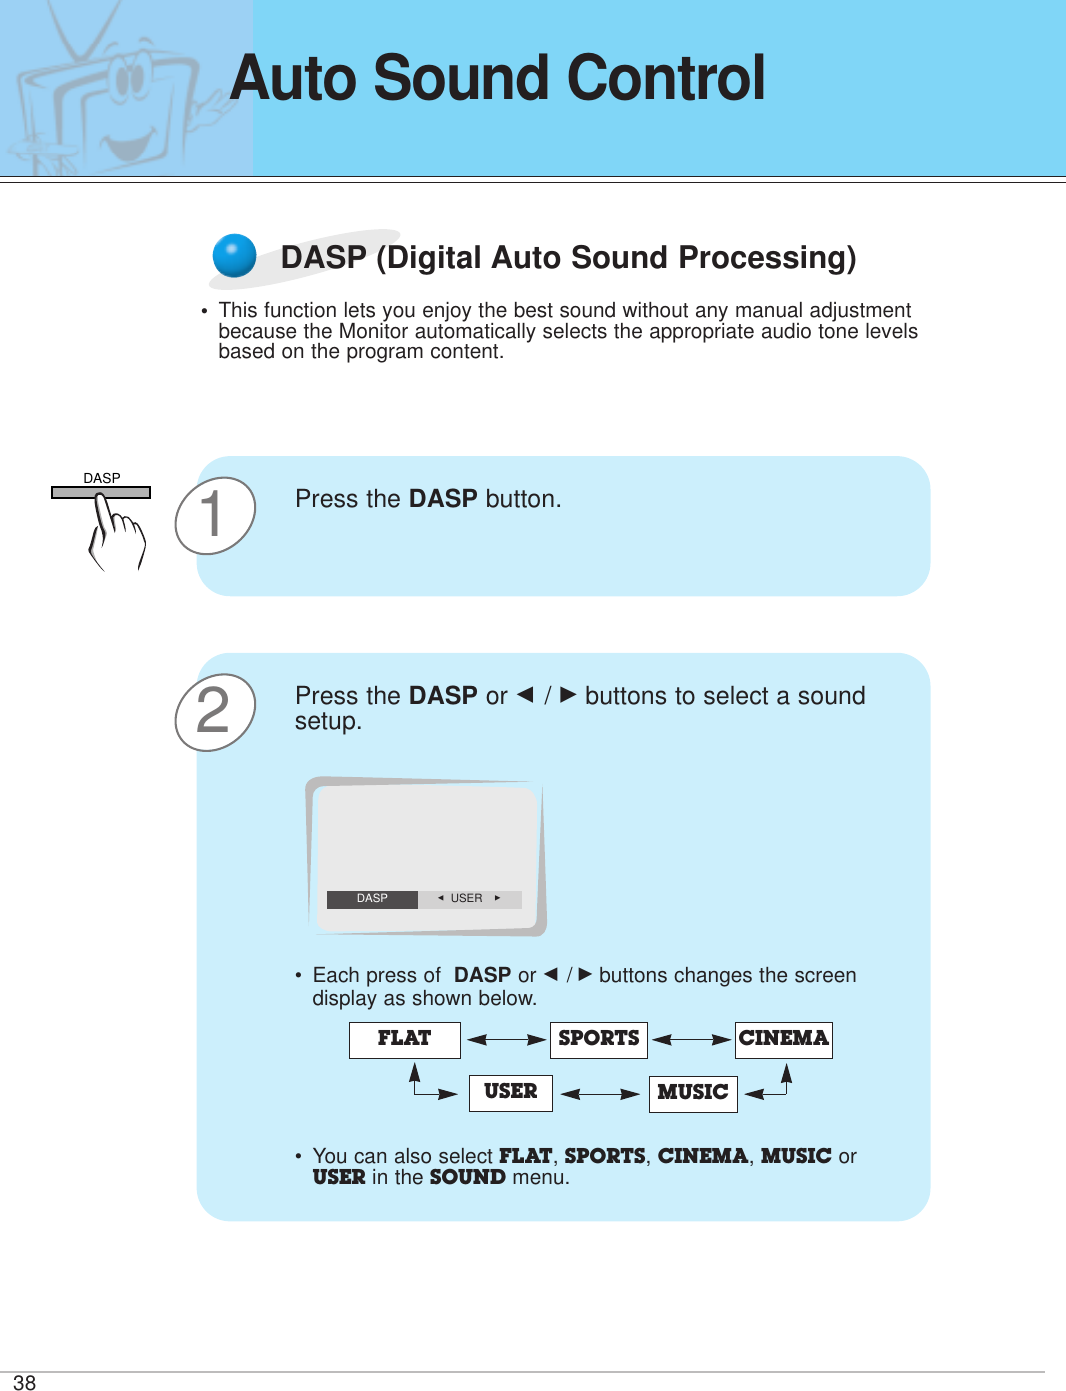 38Auto Sound ControlDASP (Digital Auto Sound Processing)•This function lets you enjoy the best sound without any manual adjustmentbecause the Monitor automatically selects the appropriate audio tone levelsbased on the program content.1Press the DASP button. 2Press the DASP or F / Gbuttons to select a soundsetup.•Each press of  DASP or F /Gbuttons changes the screendisplay as shown below.• You can also select FLAT, SPORTS, CINEMA, MUSIC orUSER in the SOUND menu. FLAT SPORTSUSERCINEMAMUSICF  USER GDASPDASP